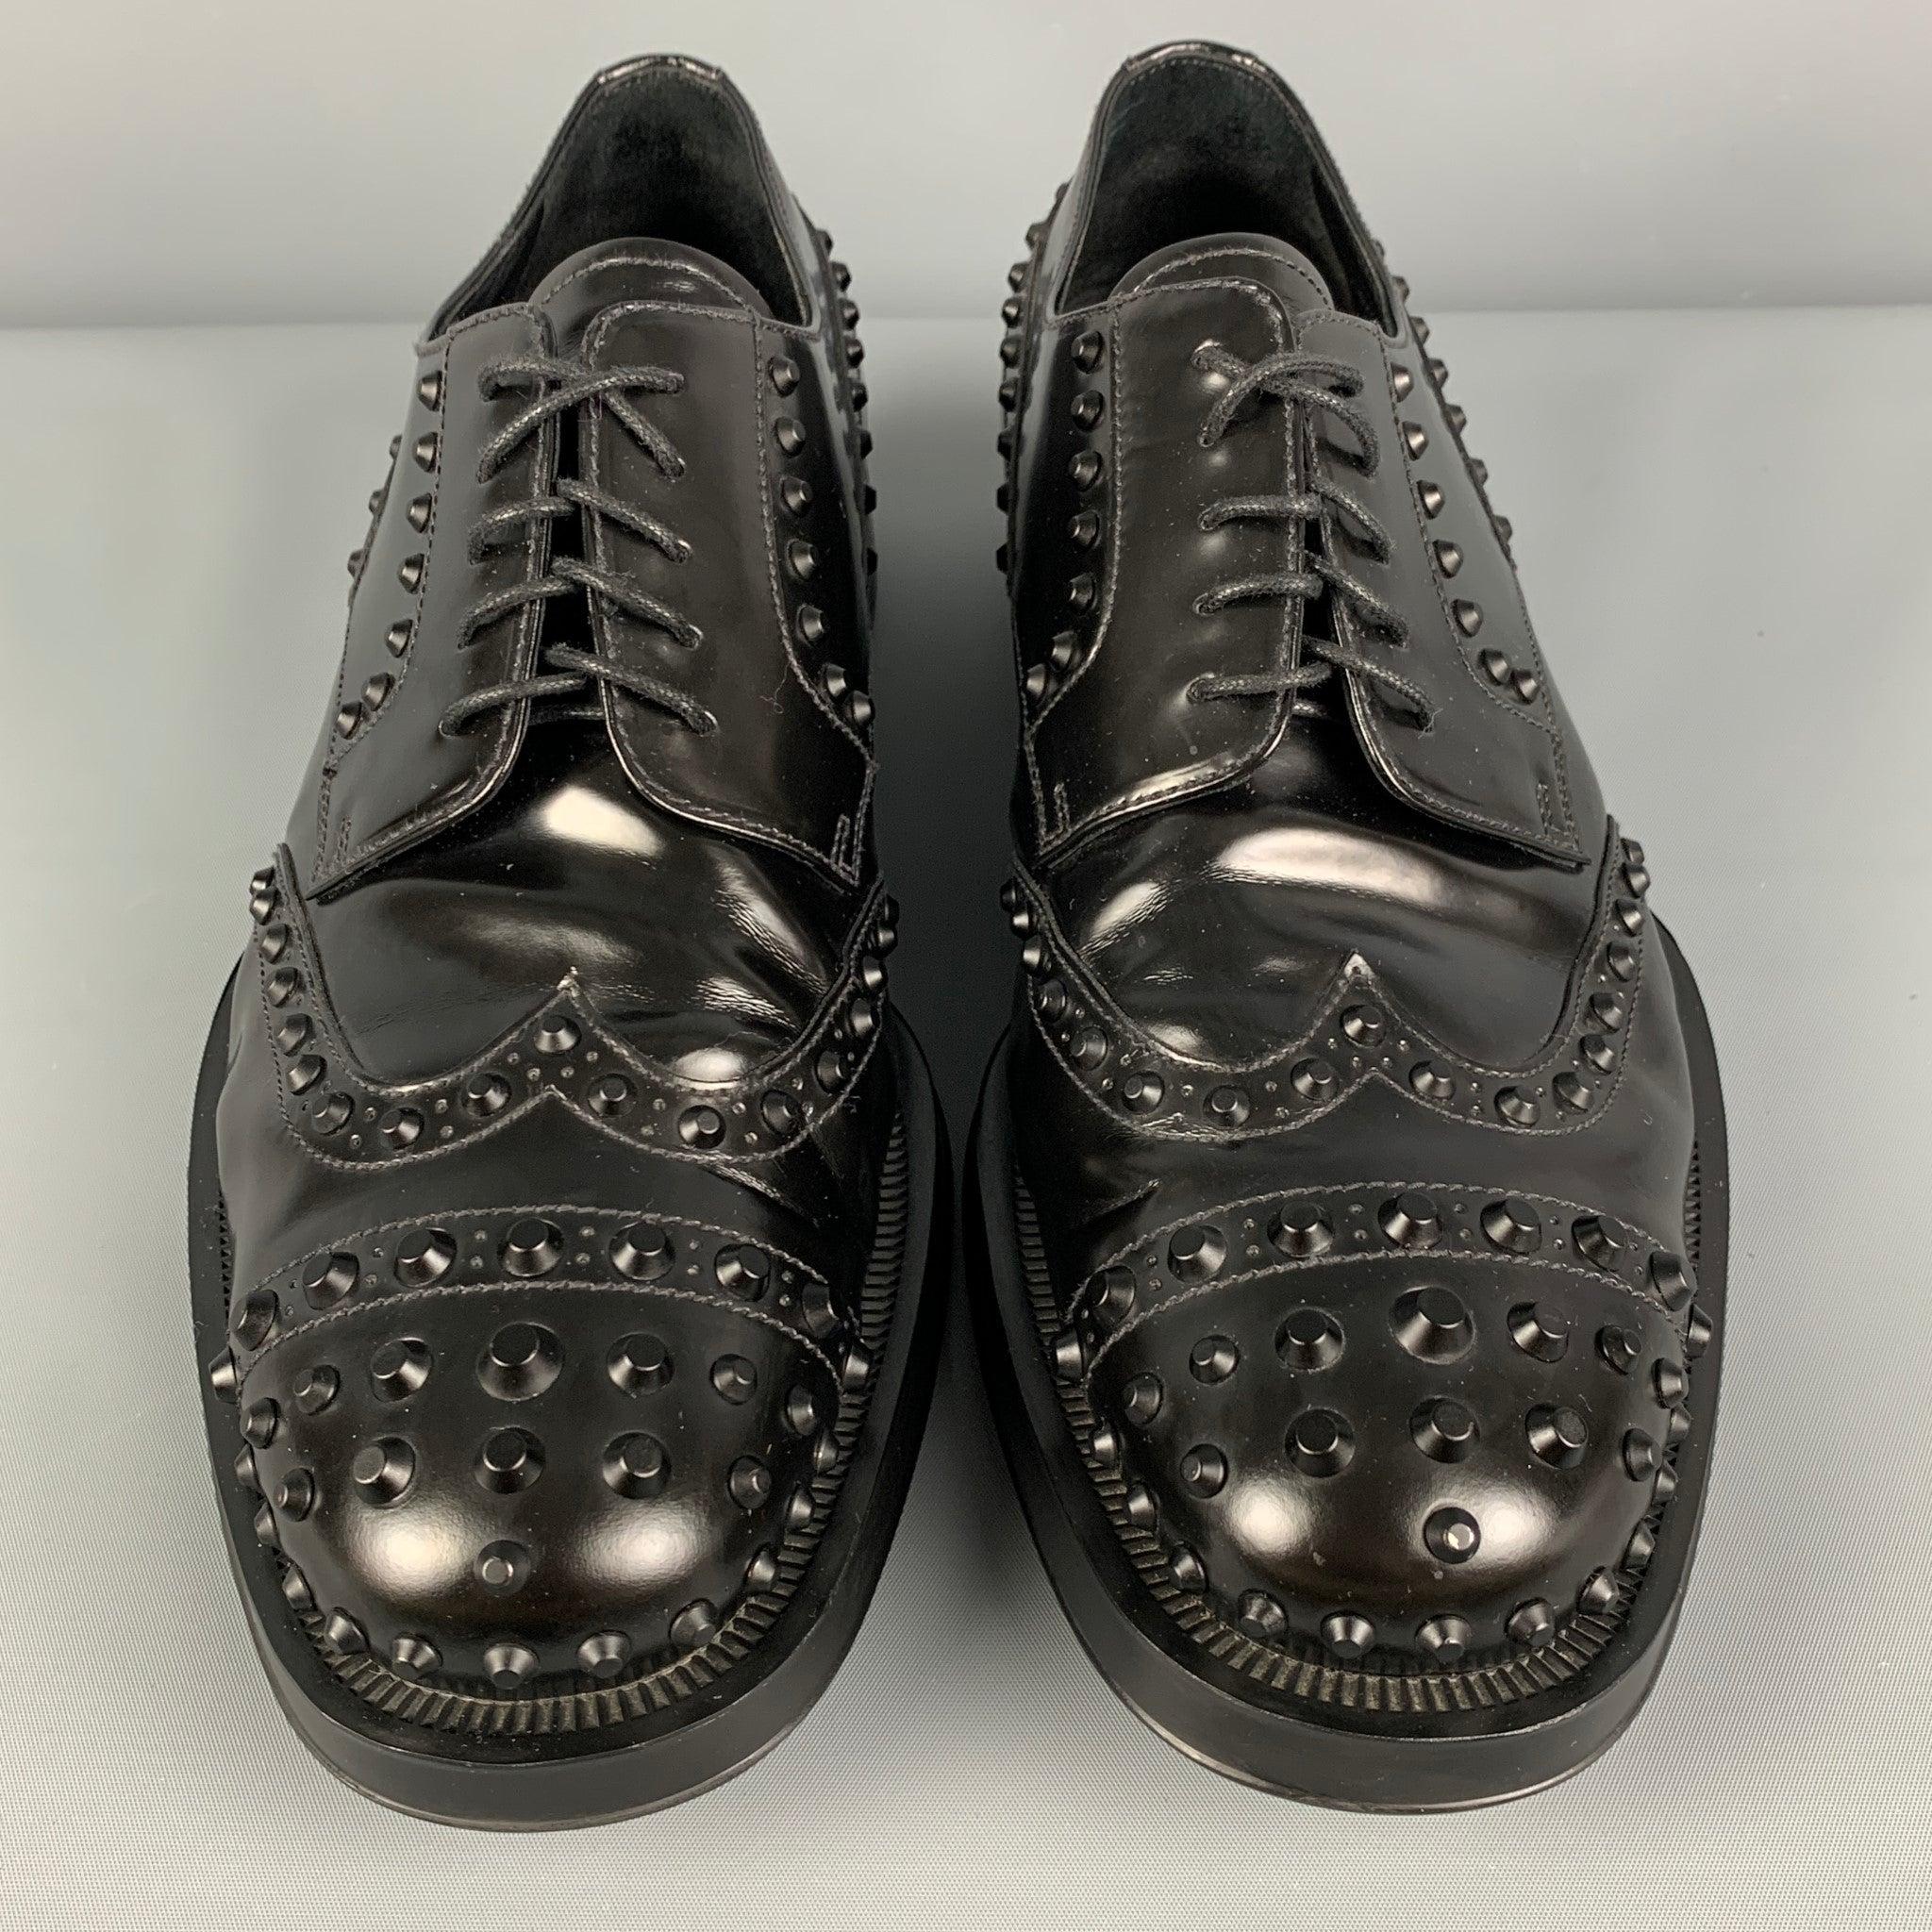 Men's PRADA Size 10.5 Black Studded Leather Lace Up Shoes For Sale